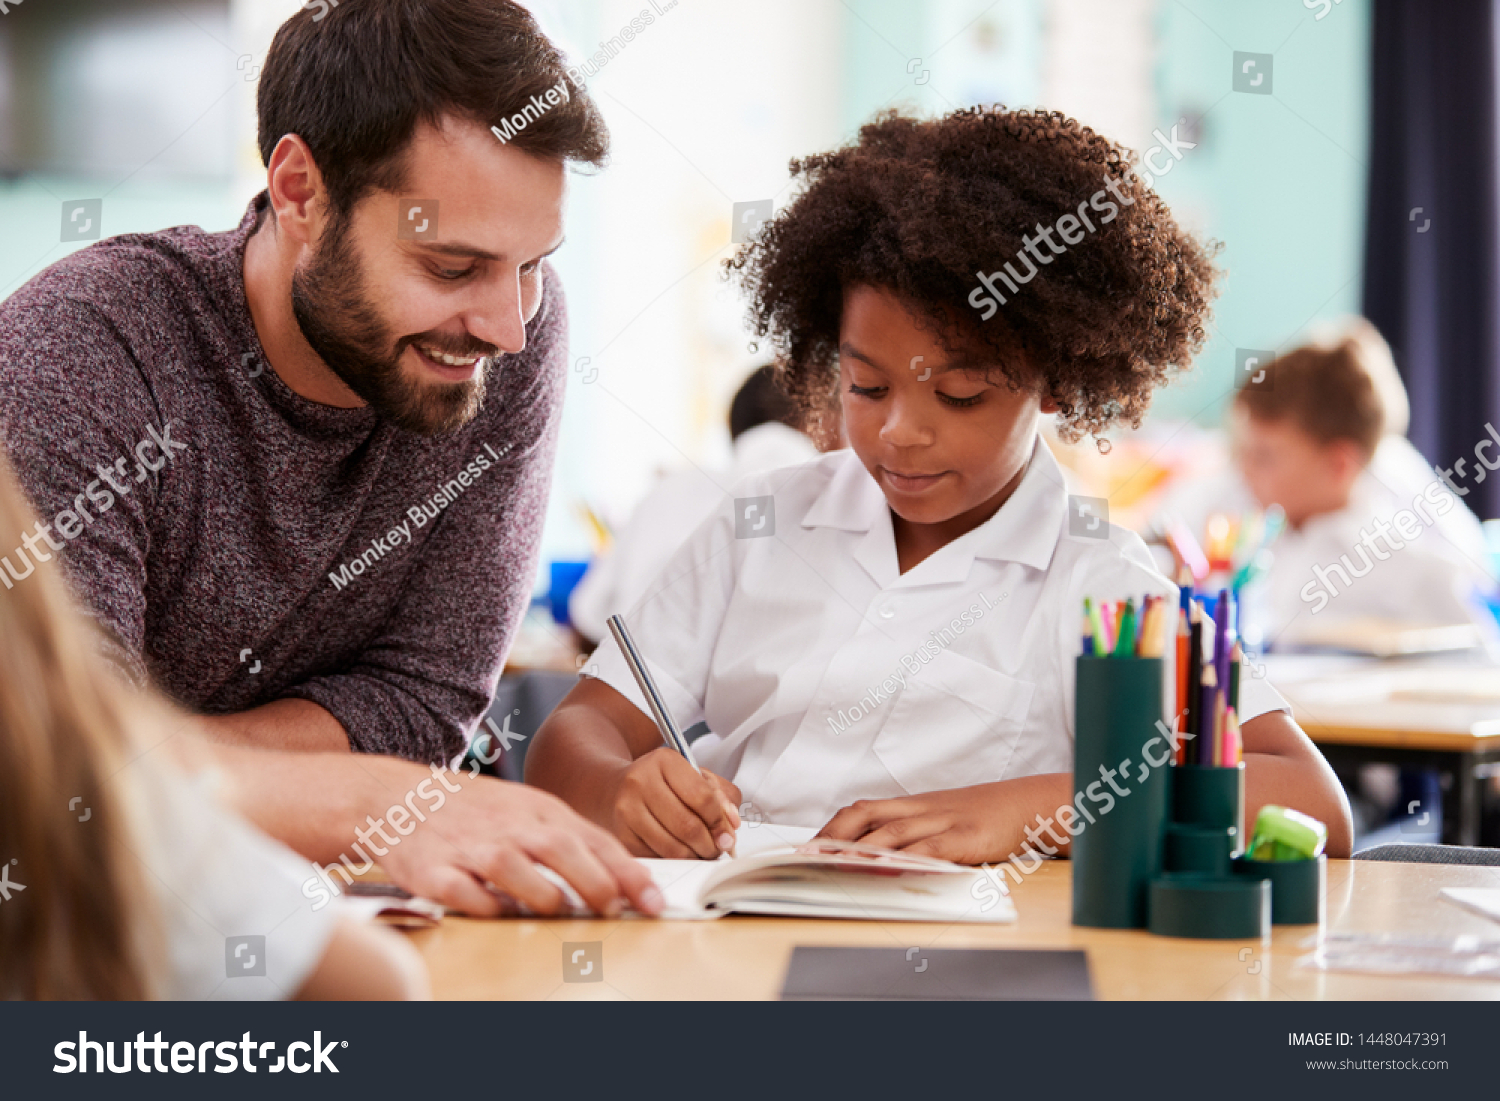 Male Elementary School Teacher Giving Female Pupil Wearing Uniform One To One Support In Classroom #1448047391